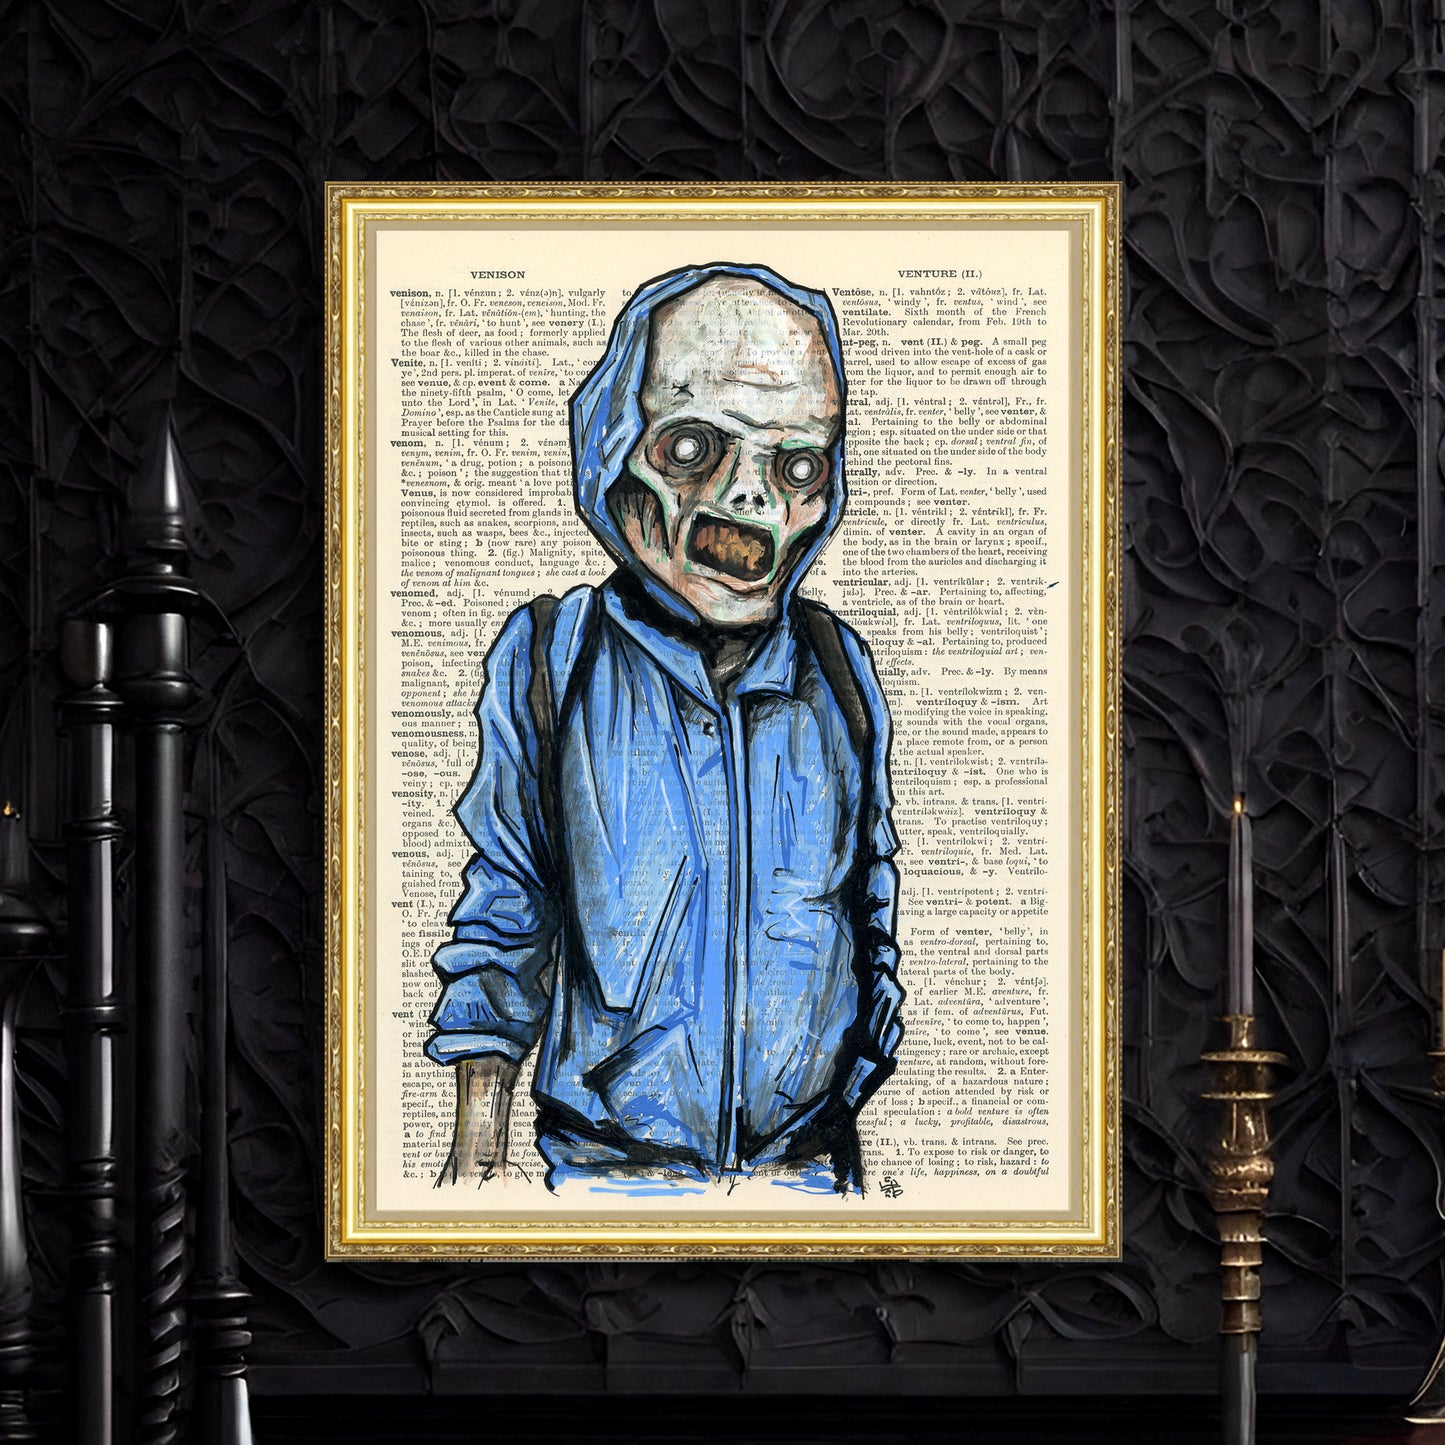 Horror Art - A haunting depiction of the undead.